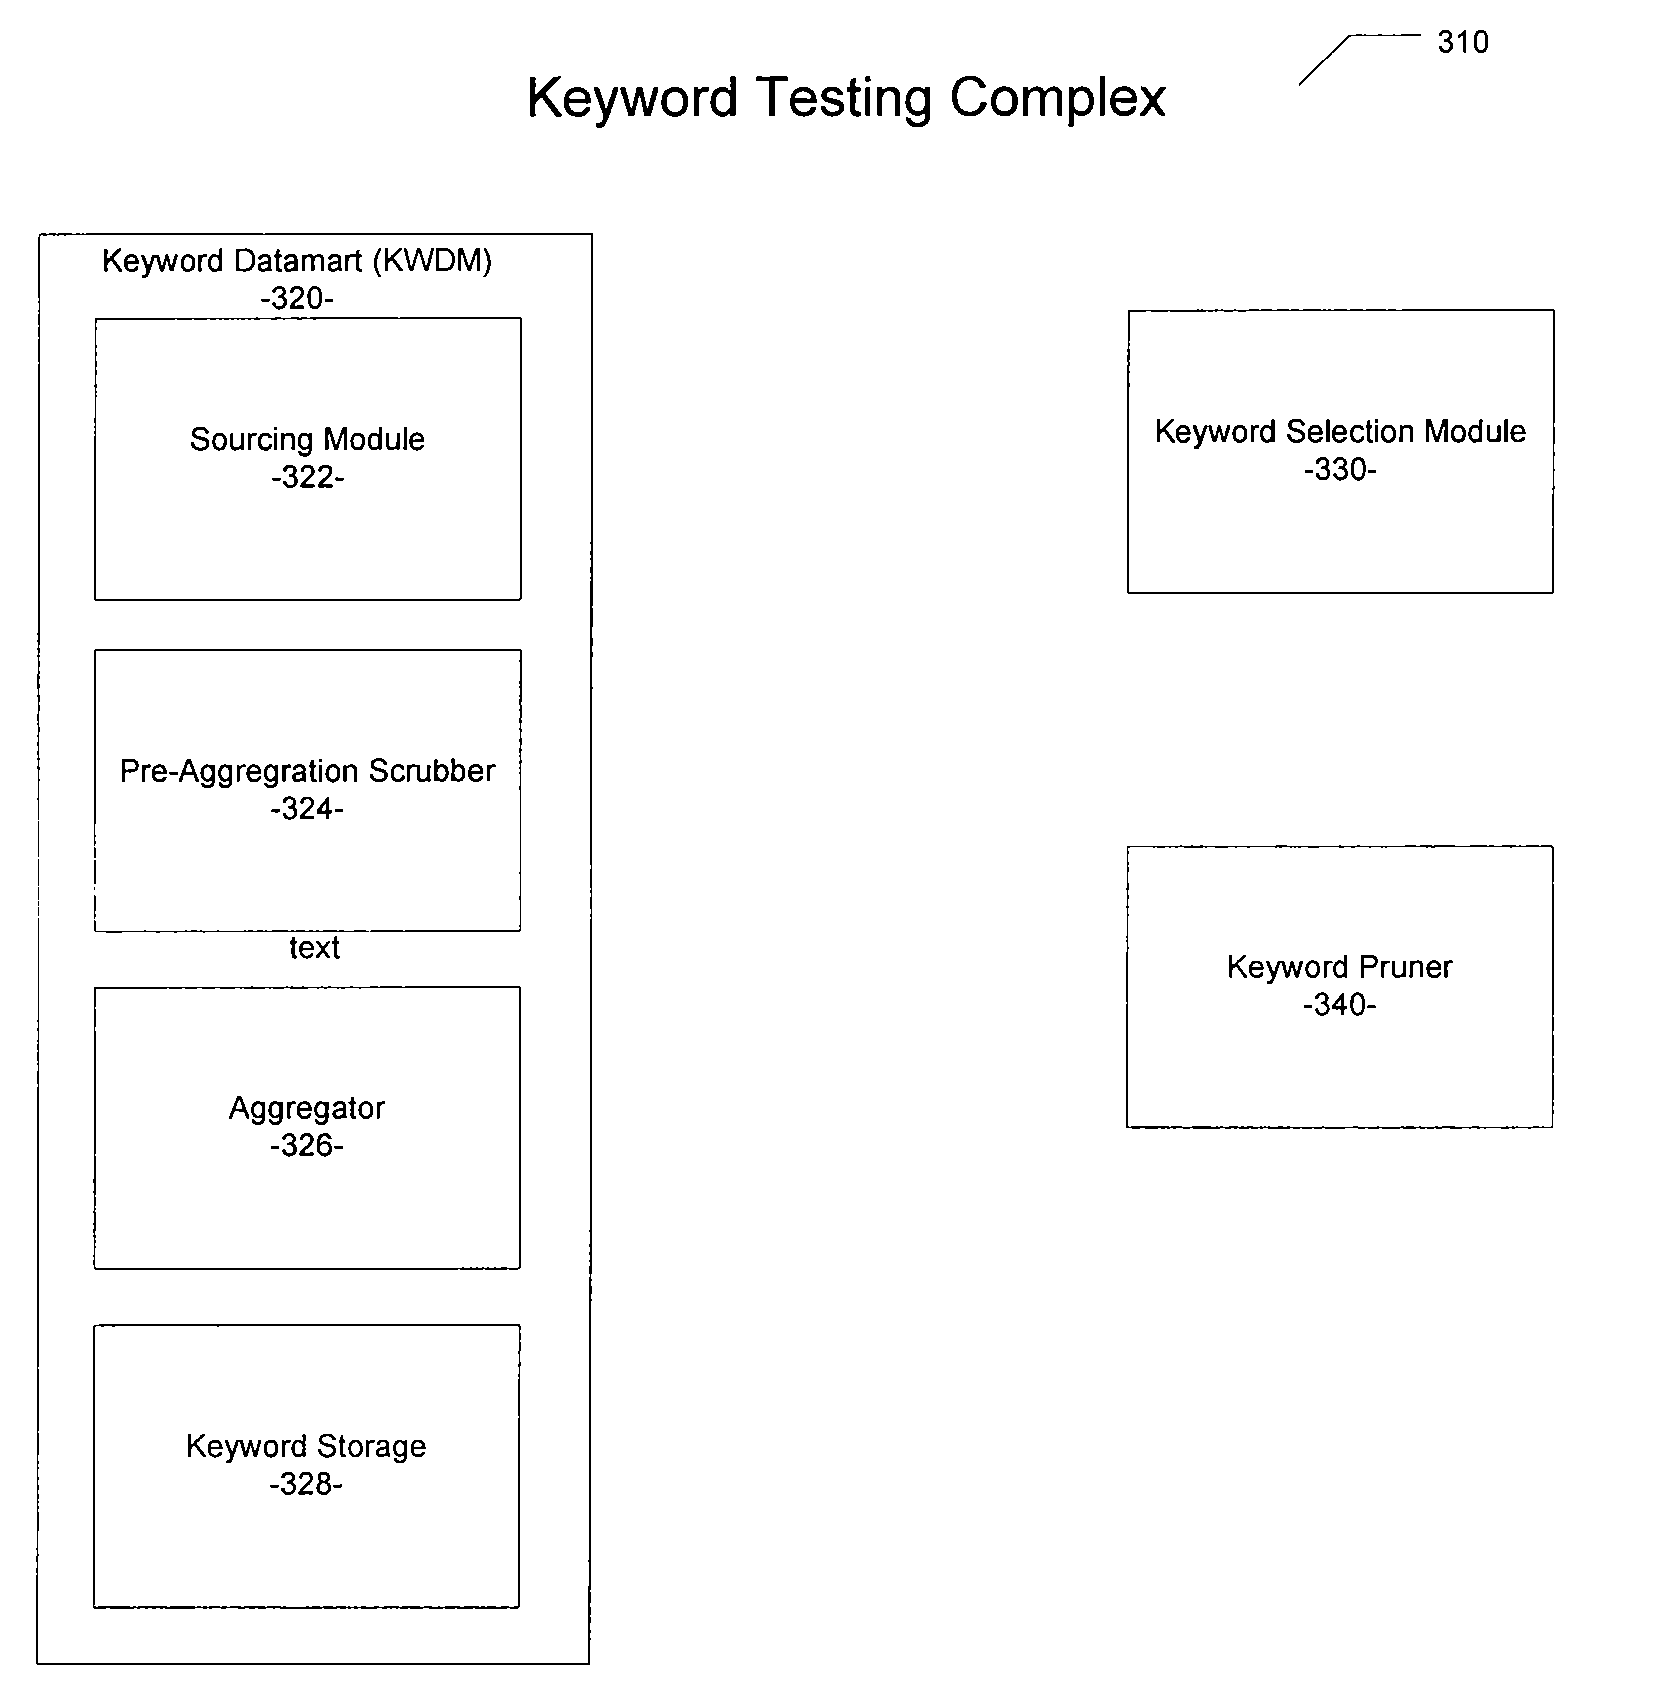 Computer-implemented method and system for enabling the automated selection of keywords for rapid keyword portfolio expansion